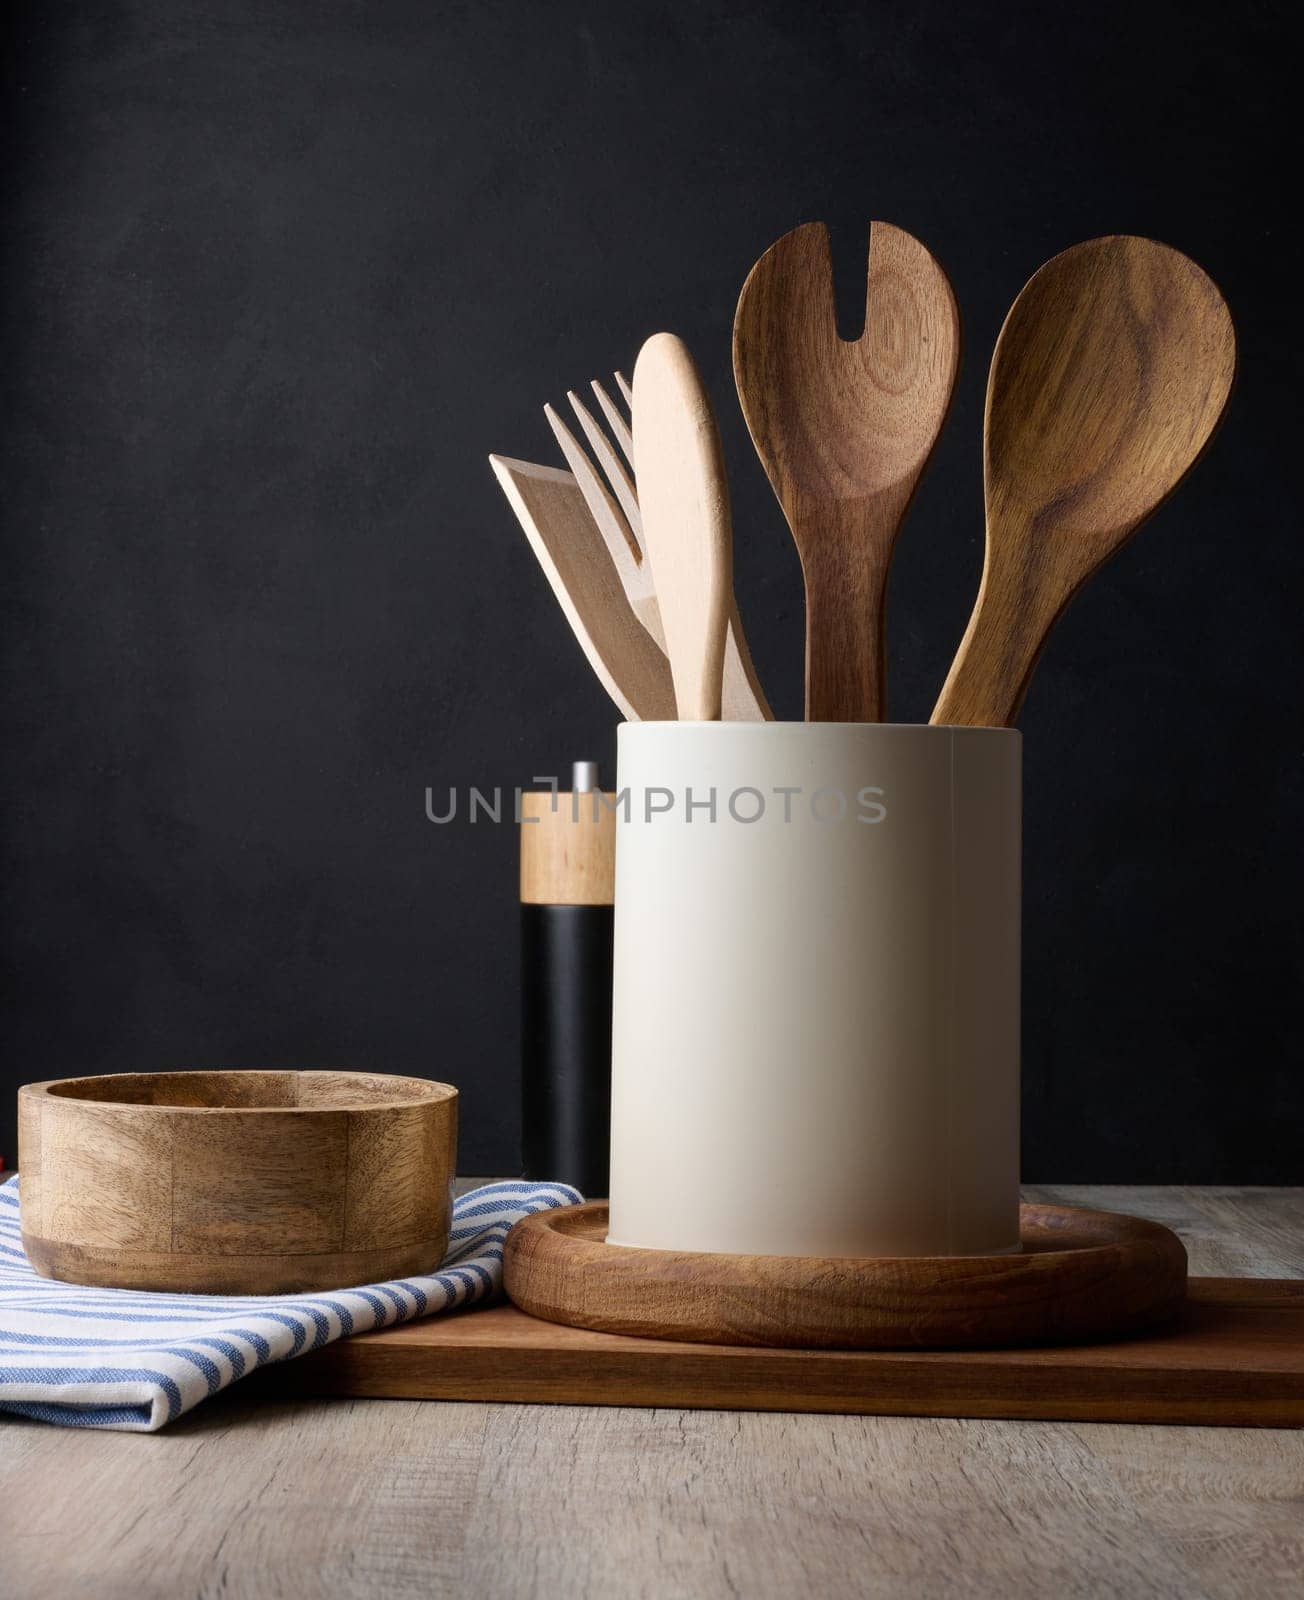 Empty bowl and wooden spoons on a table, black background